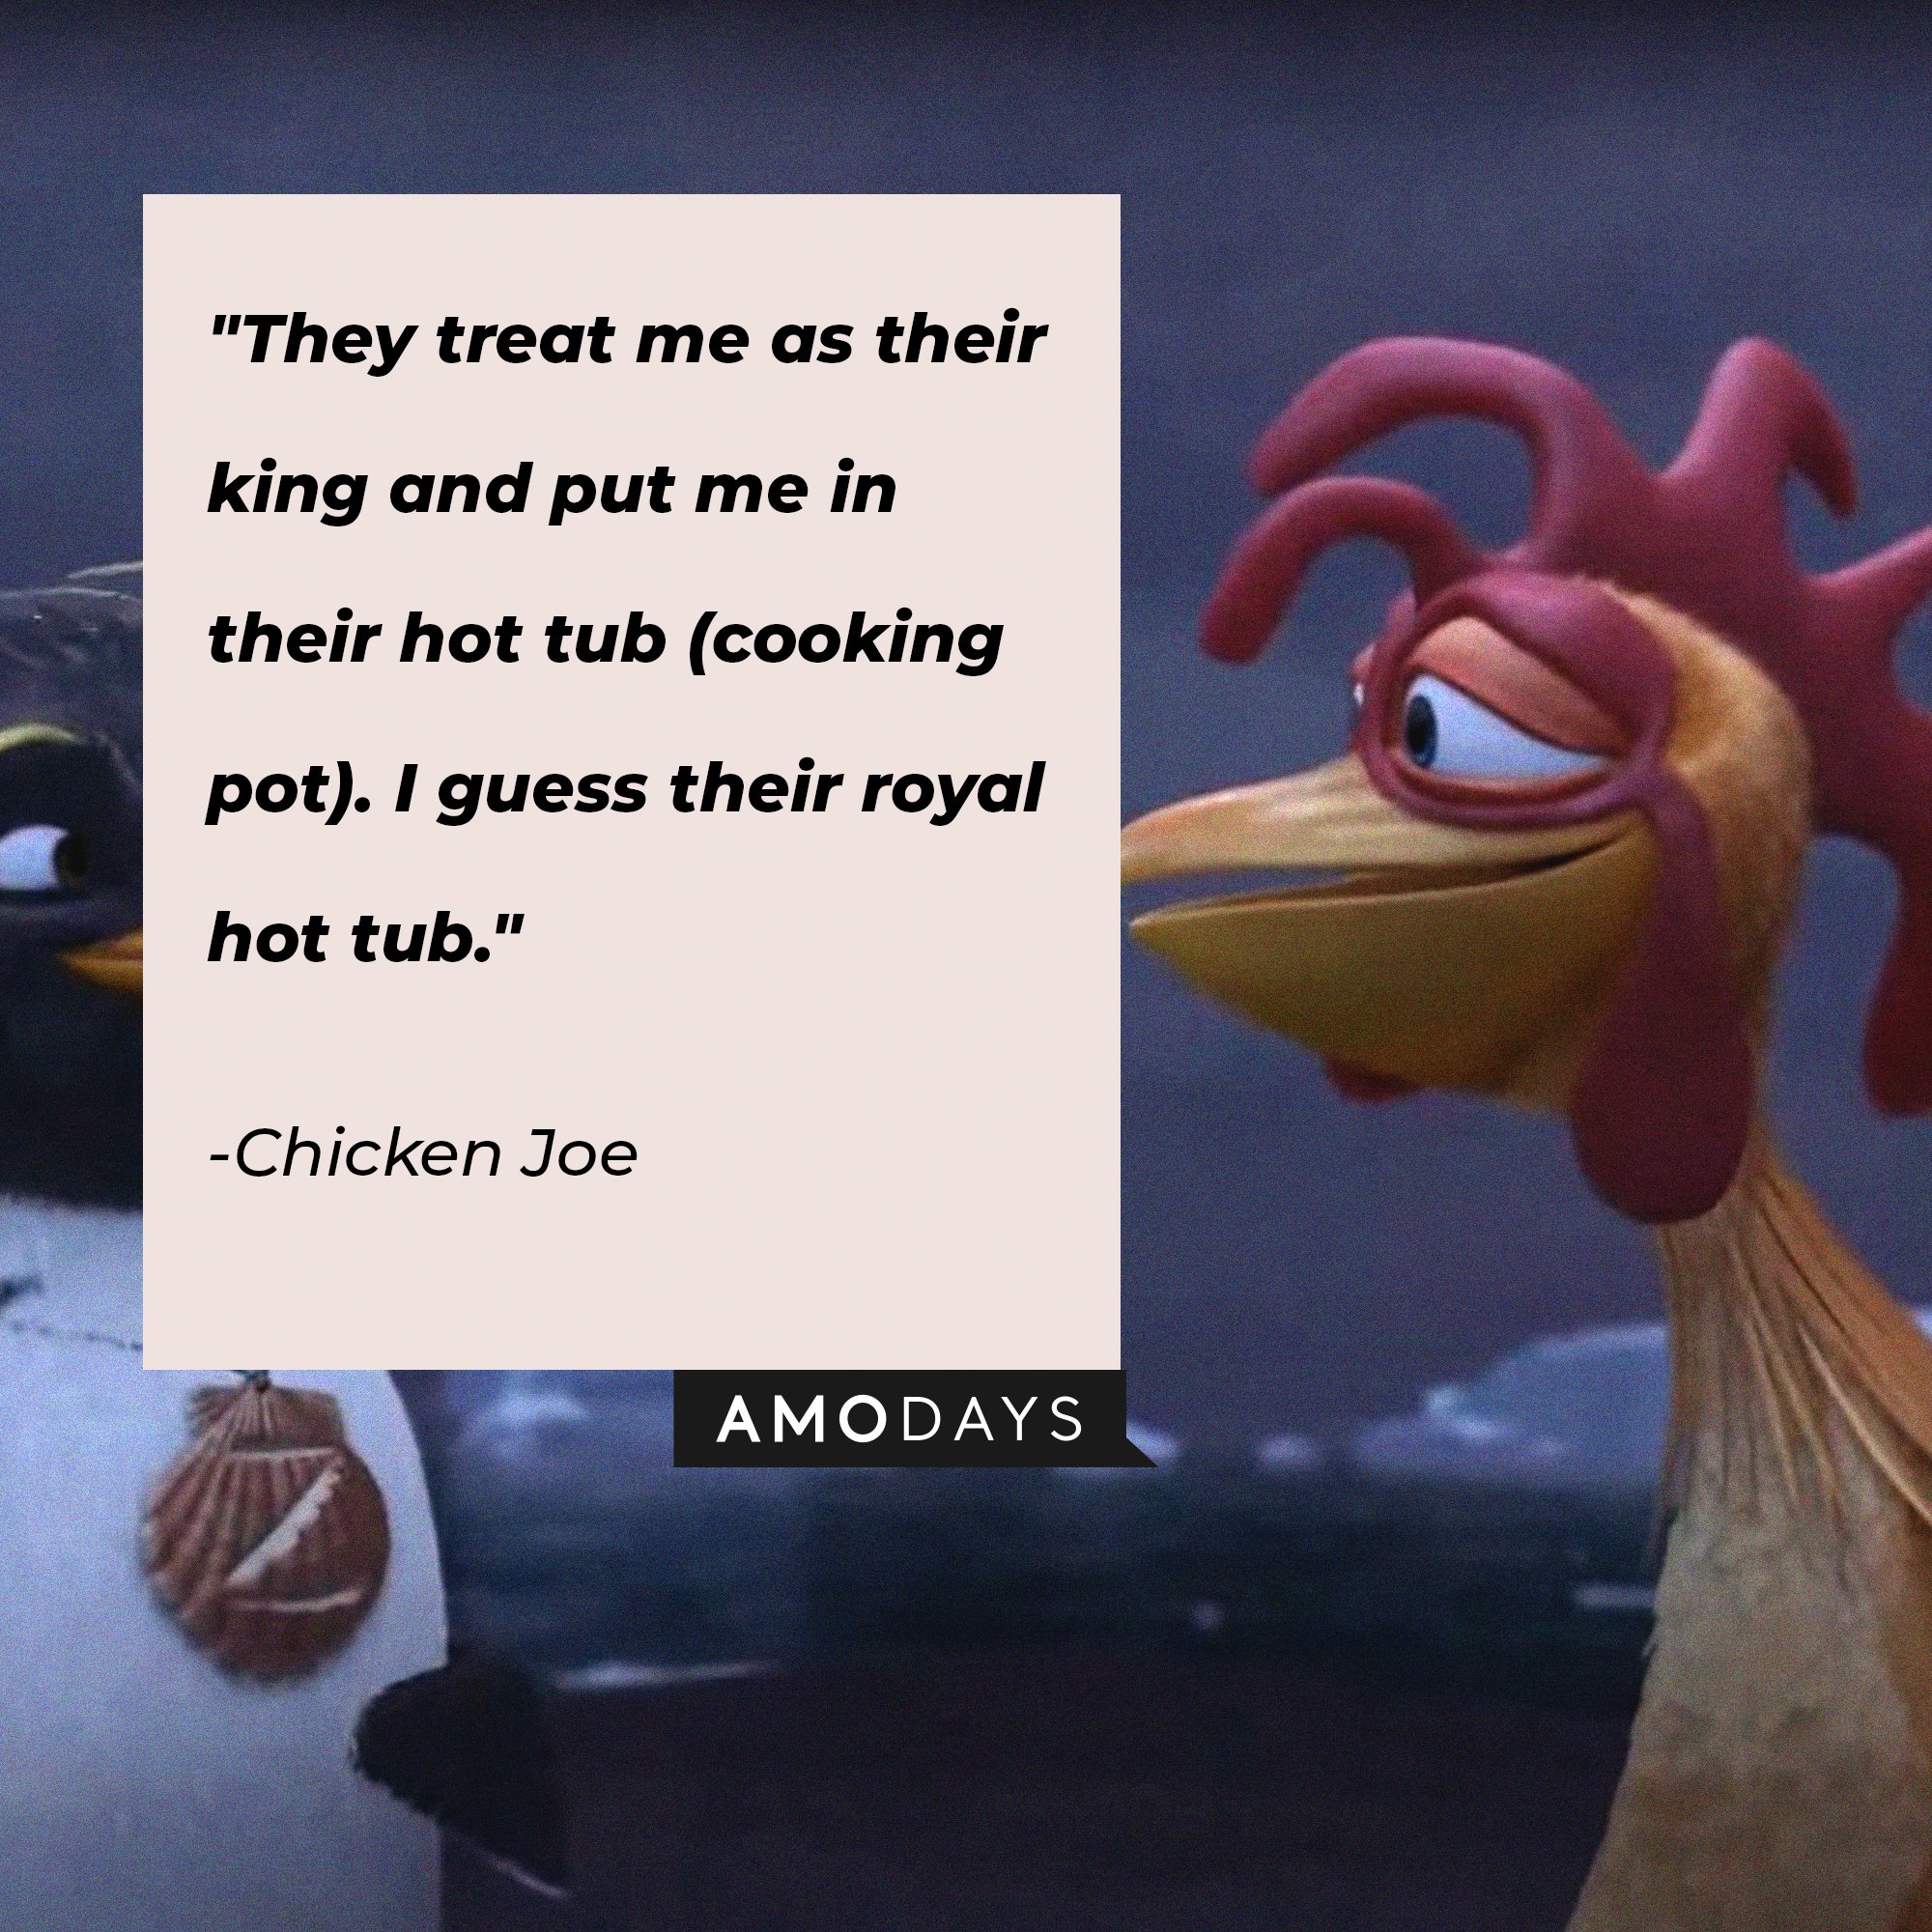 Chicken Joe's quote: "They treat me as their king and put me in their hot tub (cooking pot). I guess their royal hot tub." | Image: AmoDays